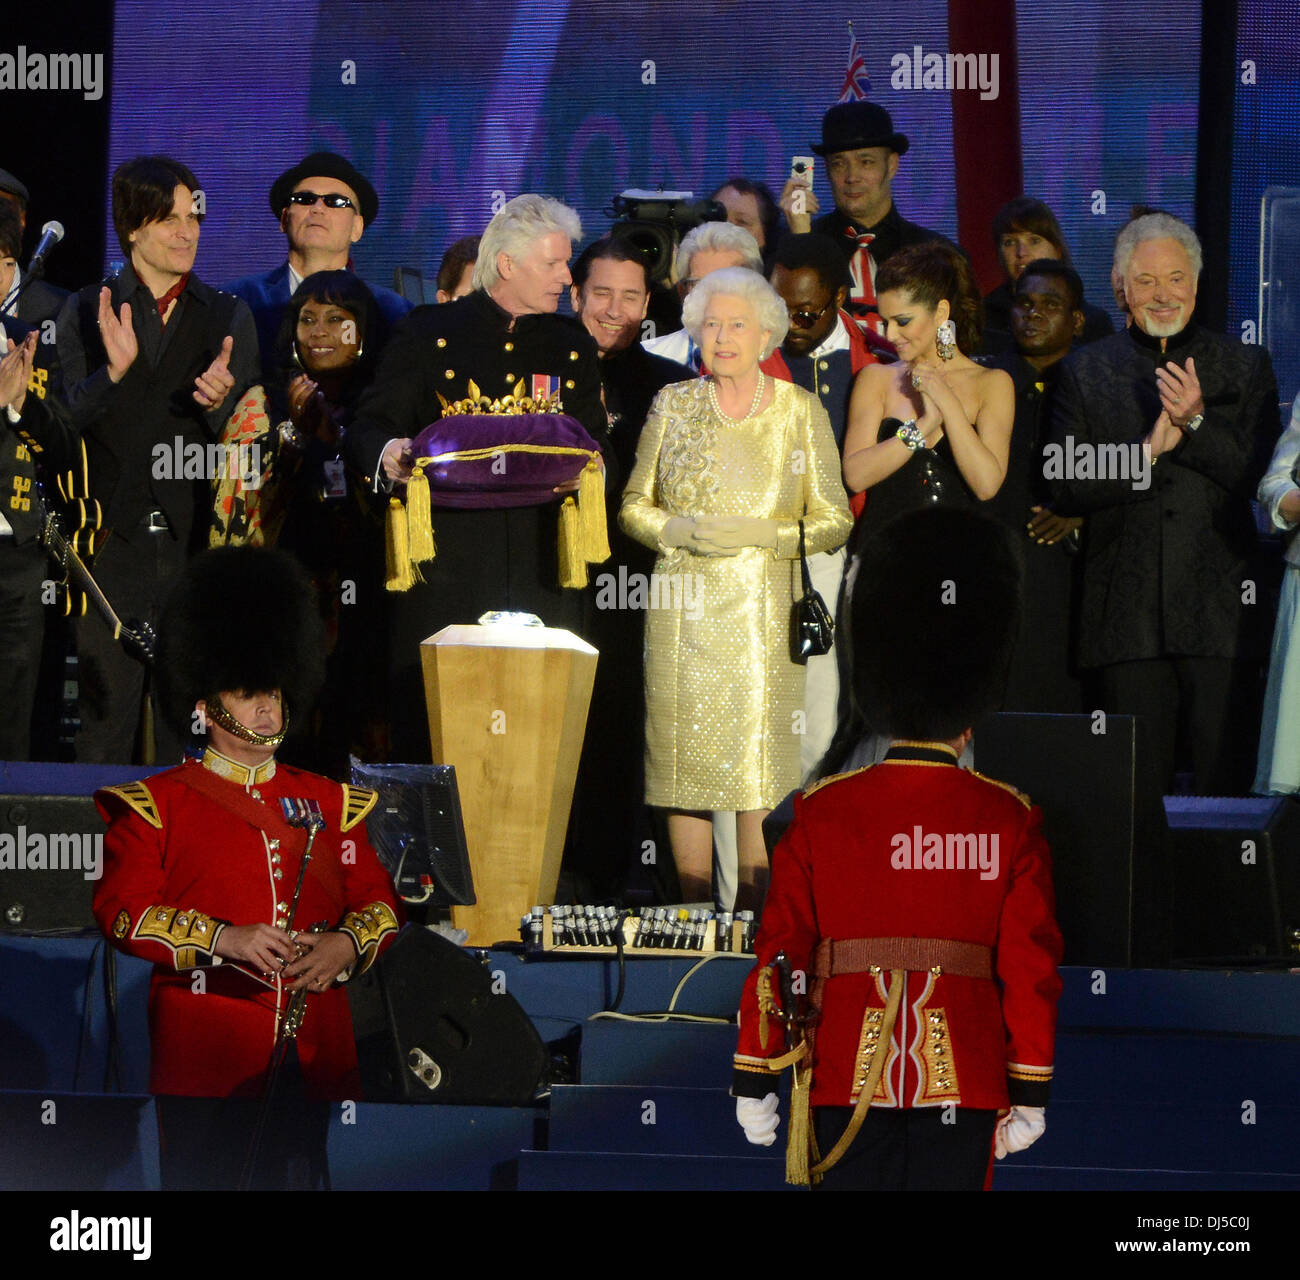 Queen Elizabeth II with Cheryl Cole, Tom Jones, Will.i.am at The Diamond Jubilee Concert at Buckingham Palace. London, England- 04.06.12 Stock Photo